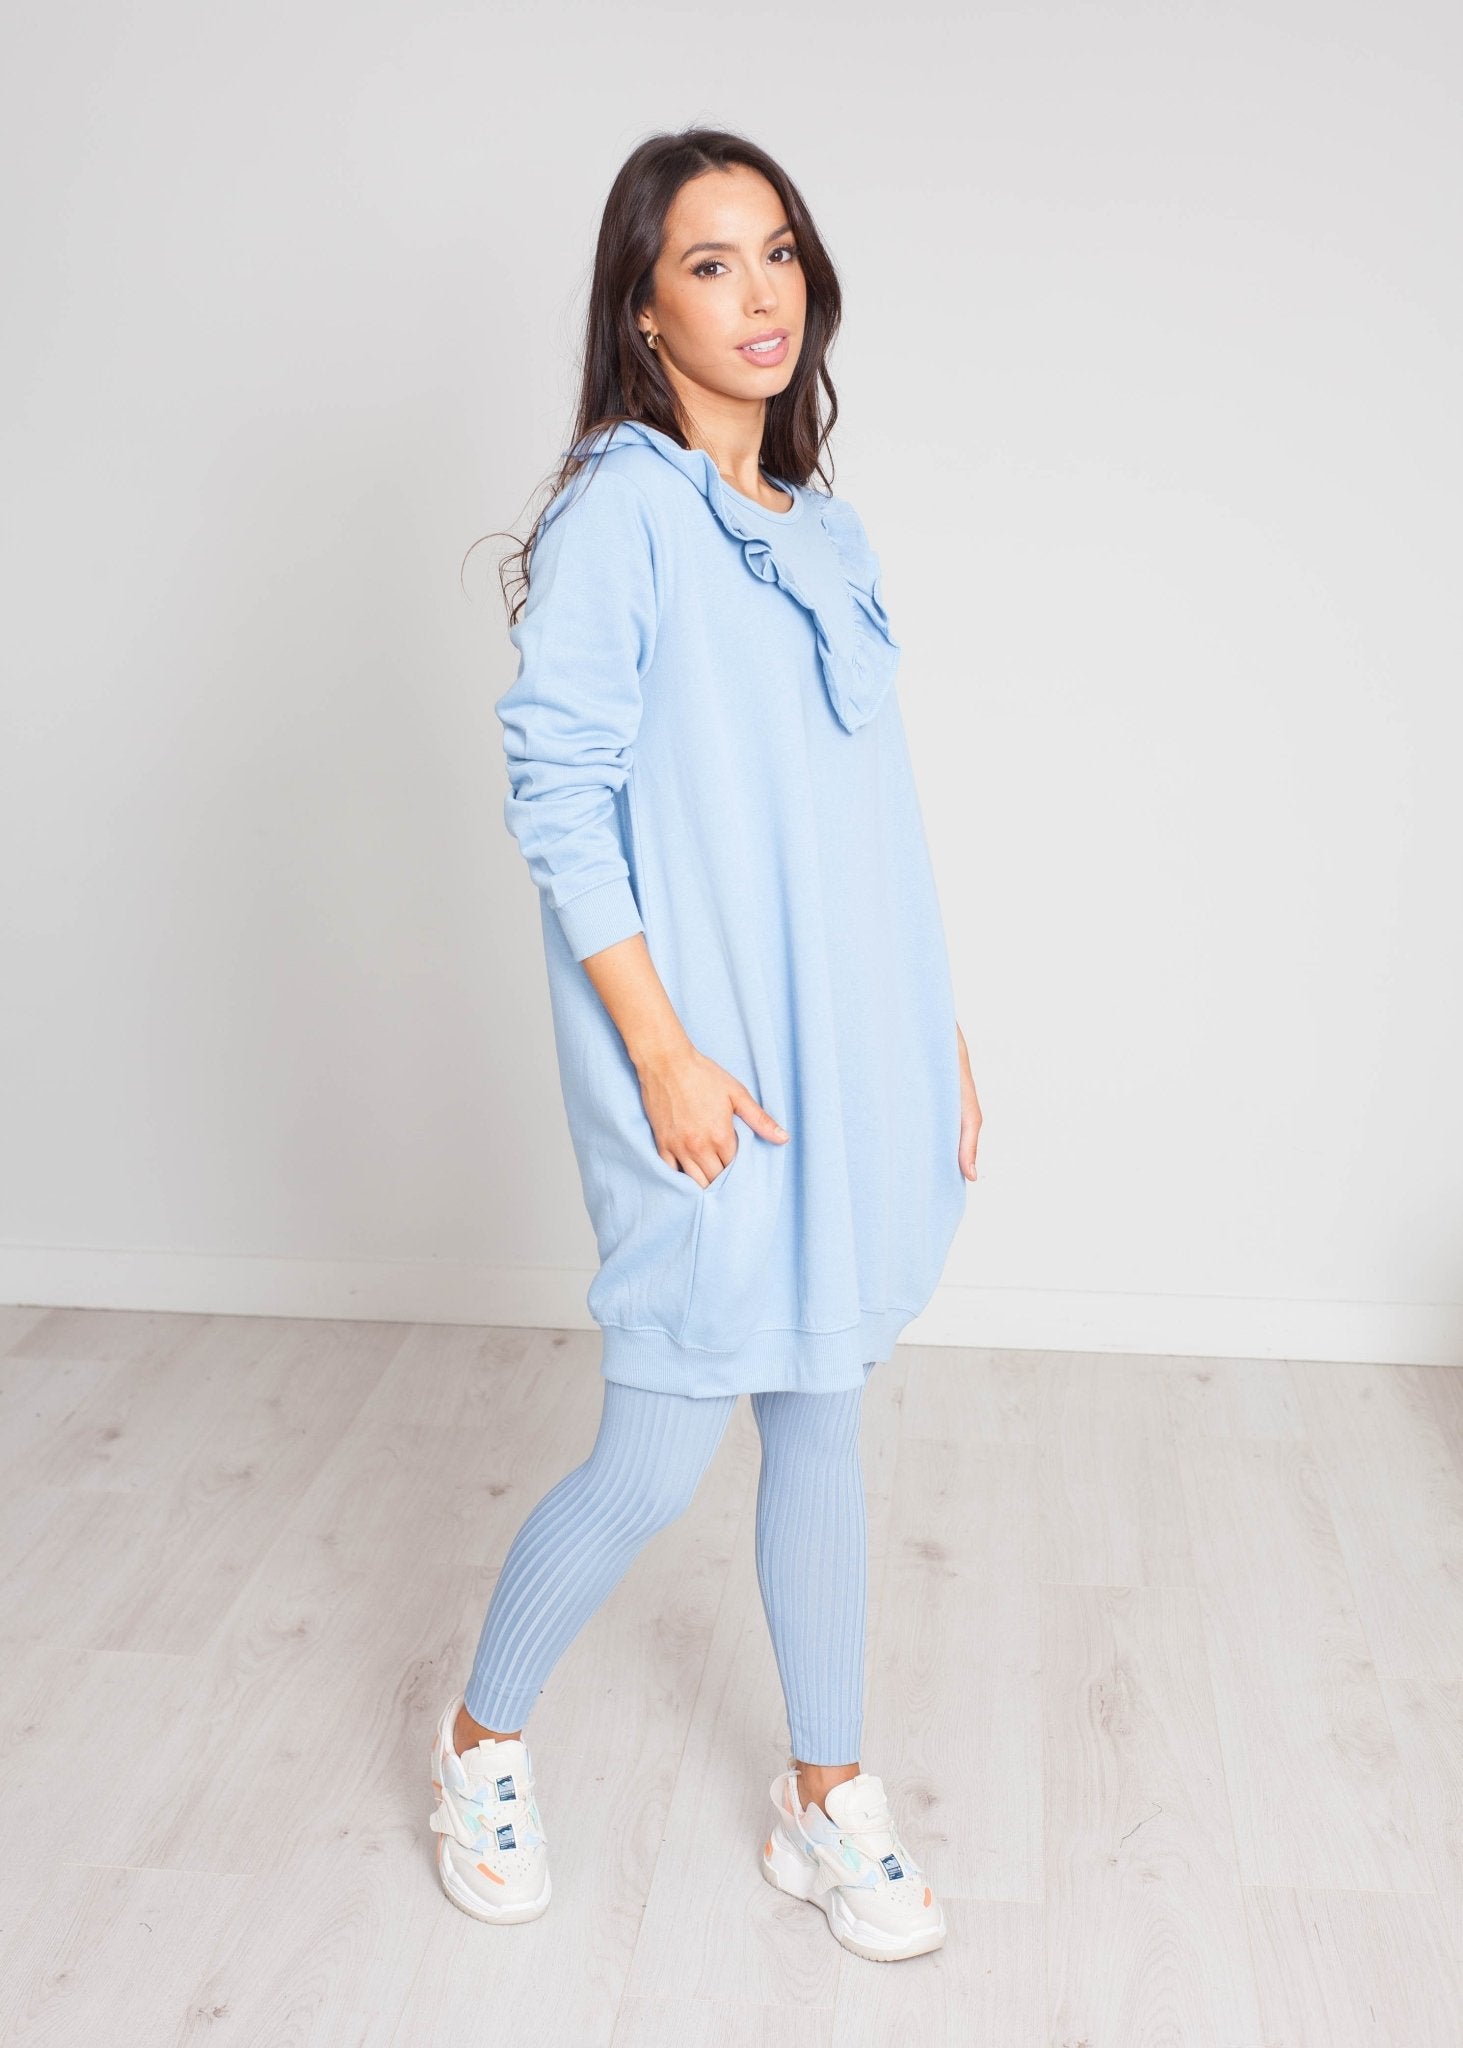 Nora Jumper Dress With Frill In Blue - The Walk in Wardrobe